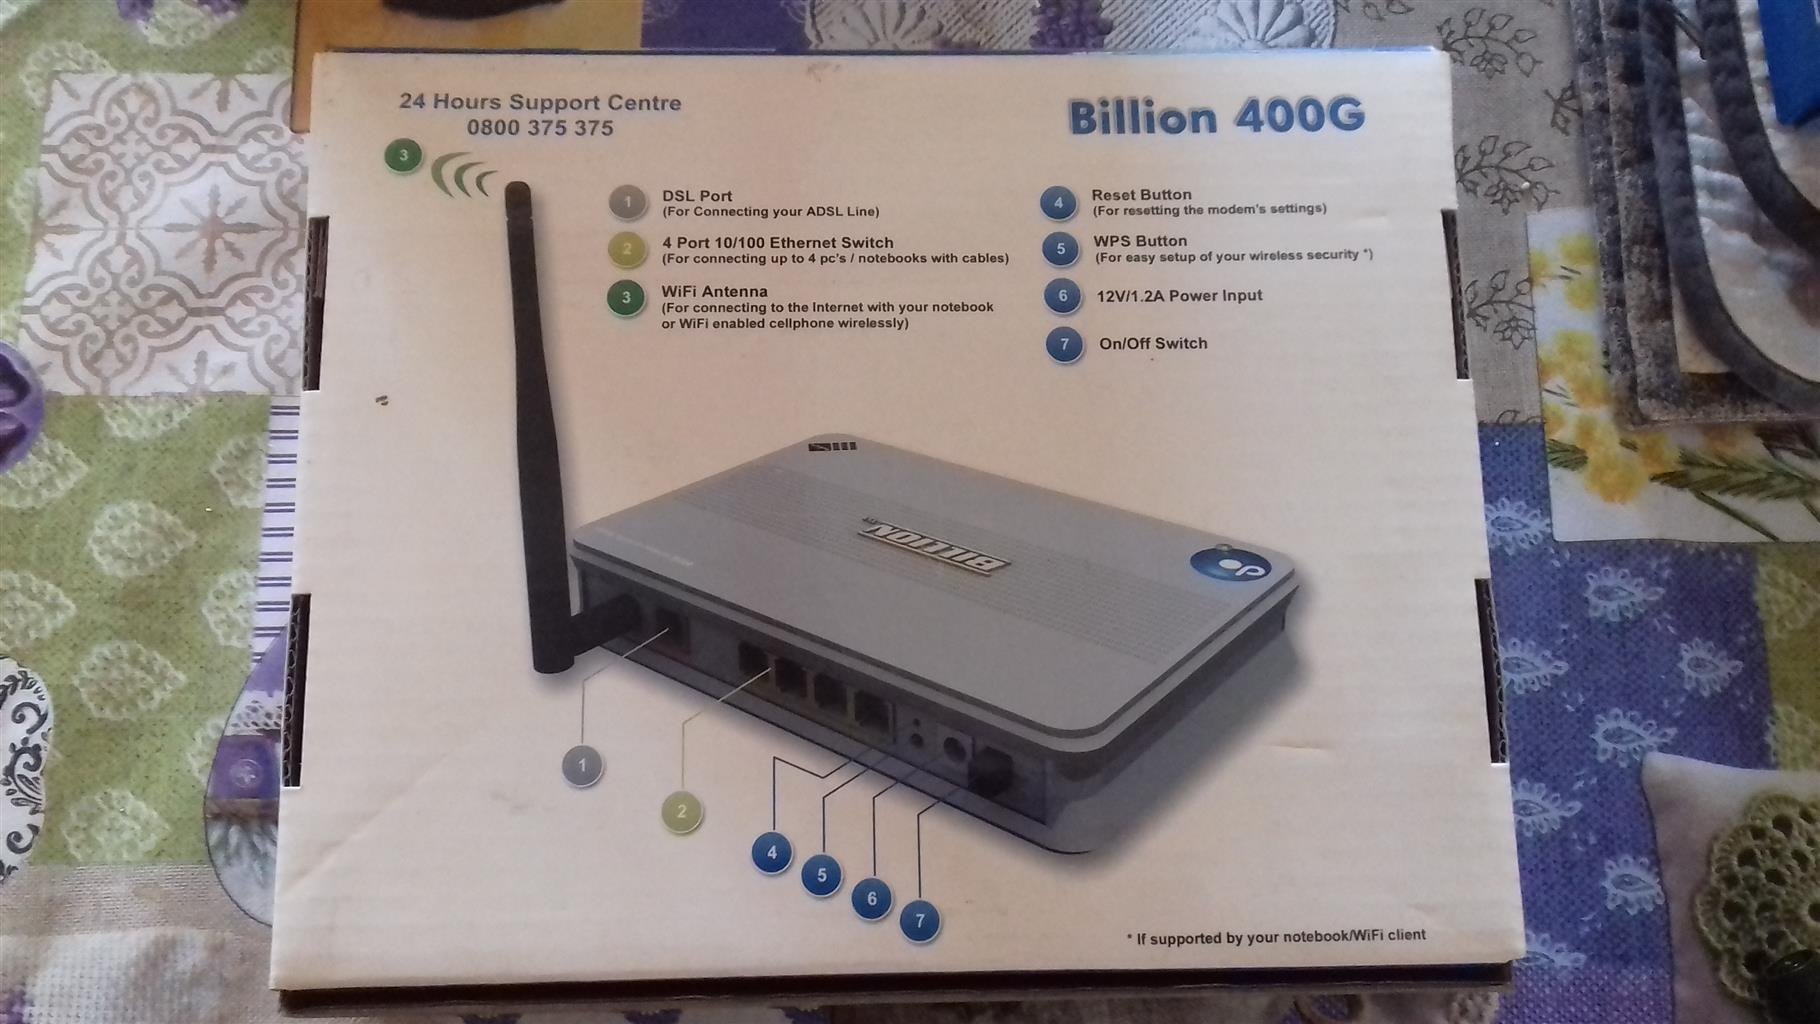 2nd hand old ADSL routers for sale